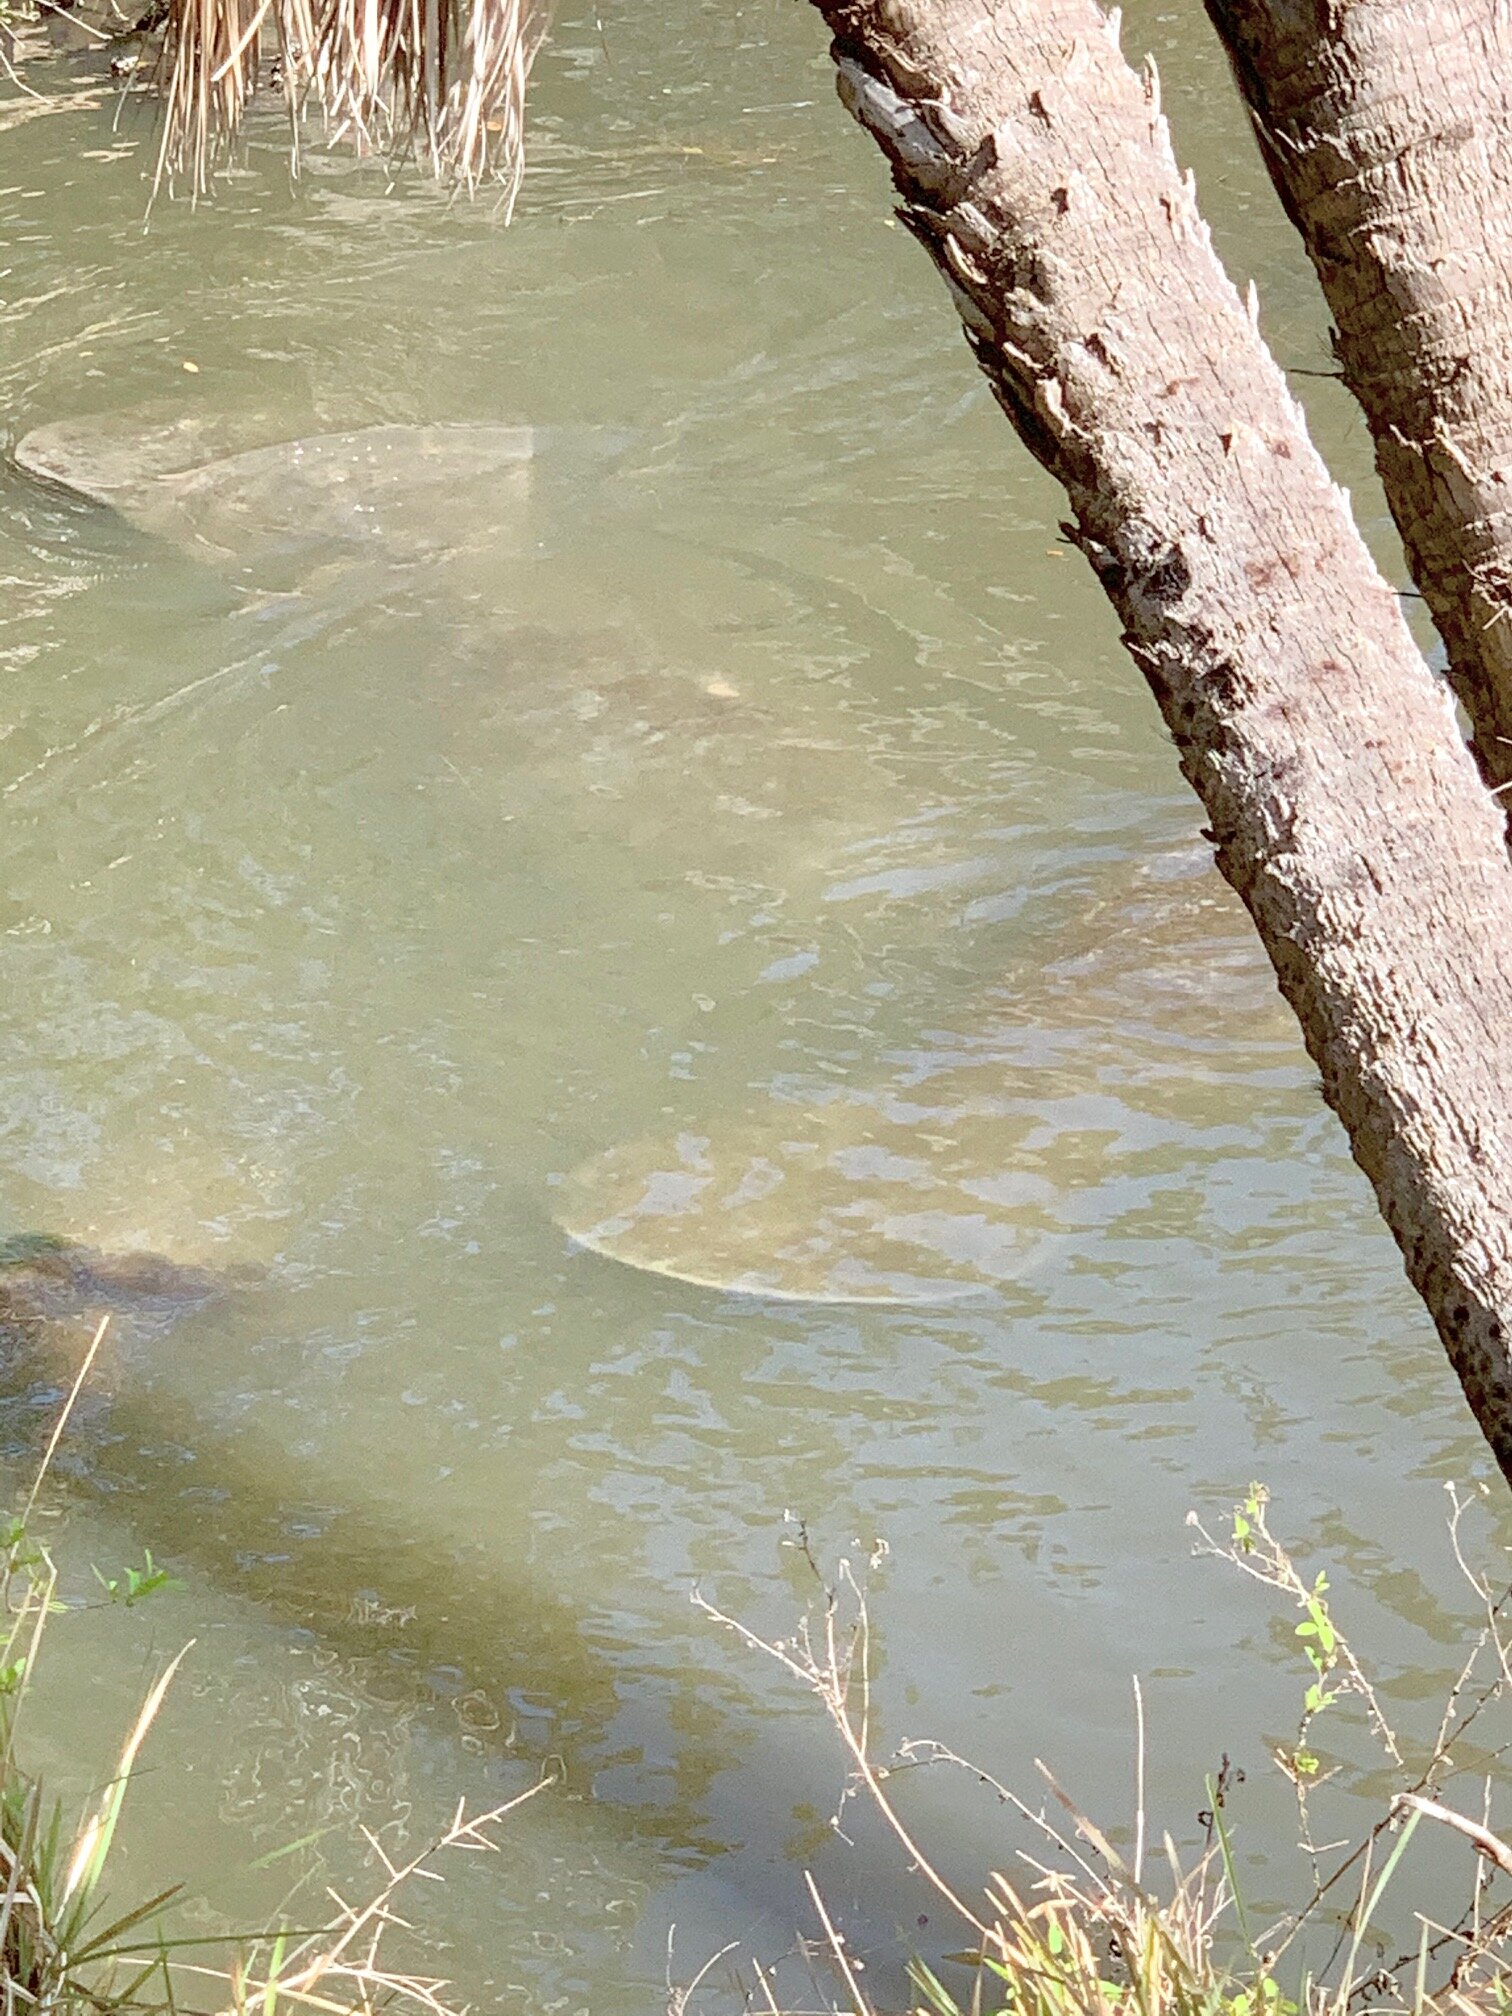  Manatees—take our word for it. 😊 We didn’t get great pictures, but we saw them at Canaveral National Seashore Park in Mims, Florida. It’s unknown why they love this area, but they are consistently seen here. They sign says,  Maybe they love to come